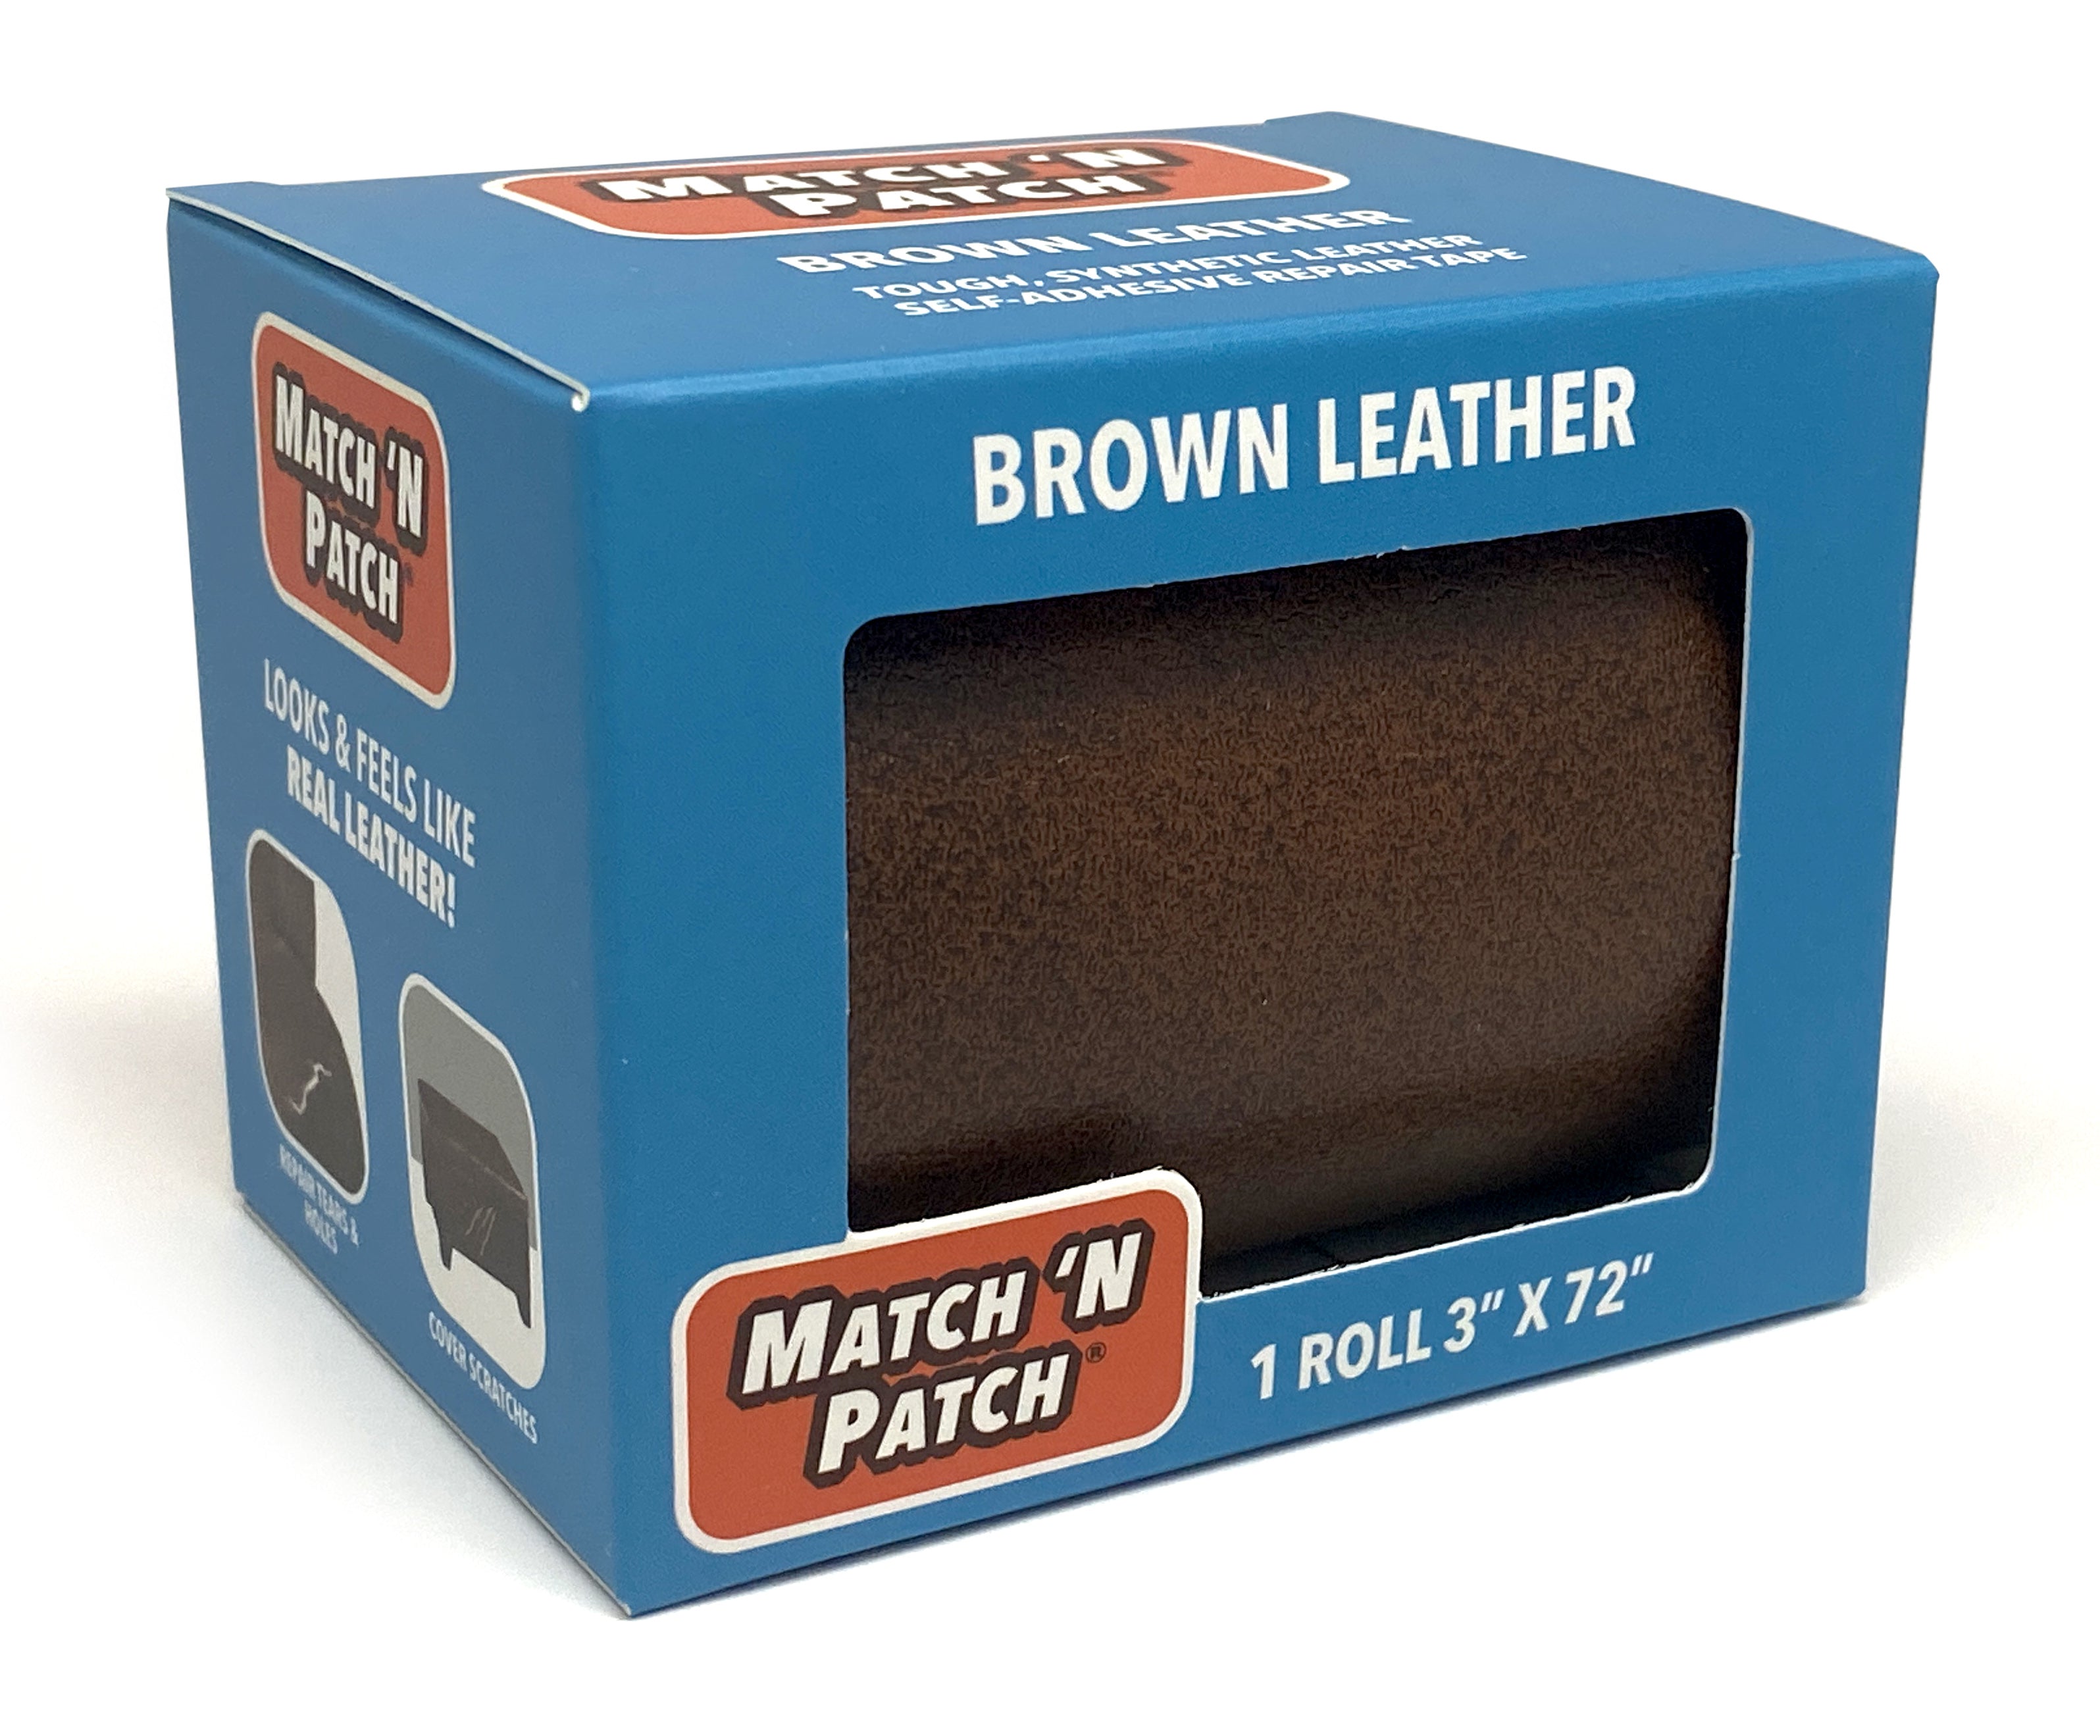 Match 'n Patch Self-Adhesive Leather Repair Tape, 3 inch x 72 inch (Brown)